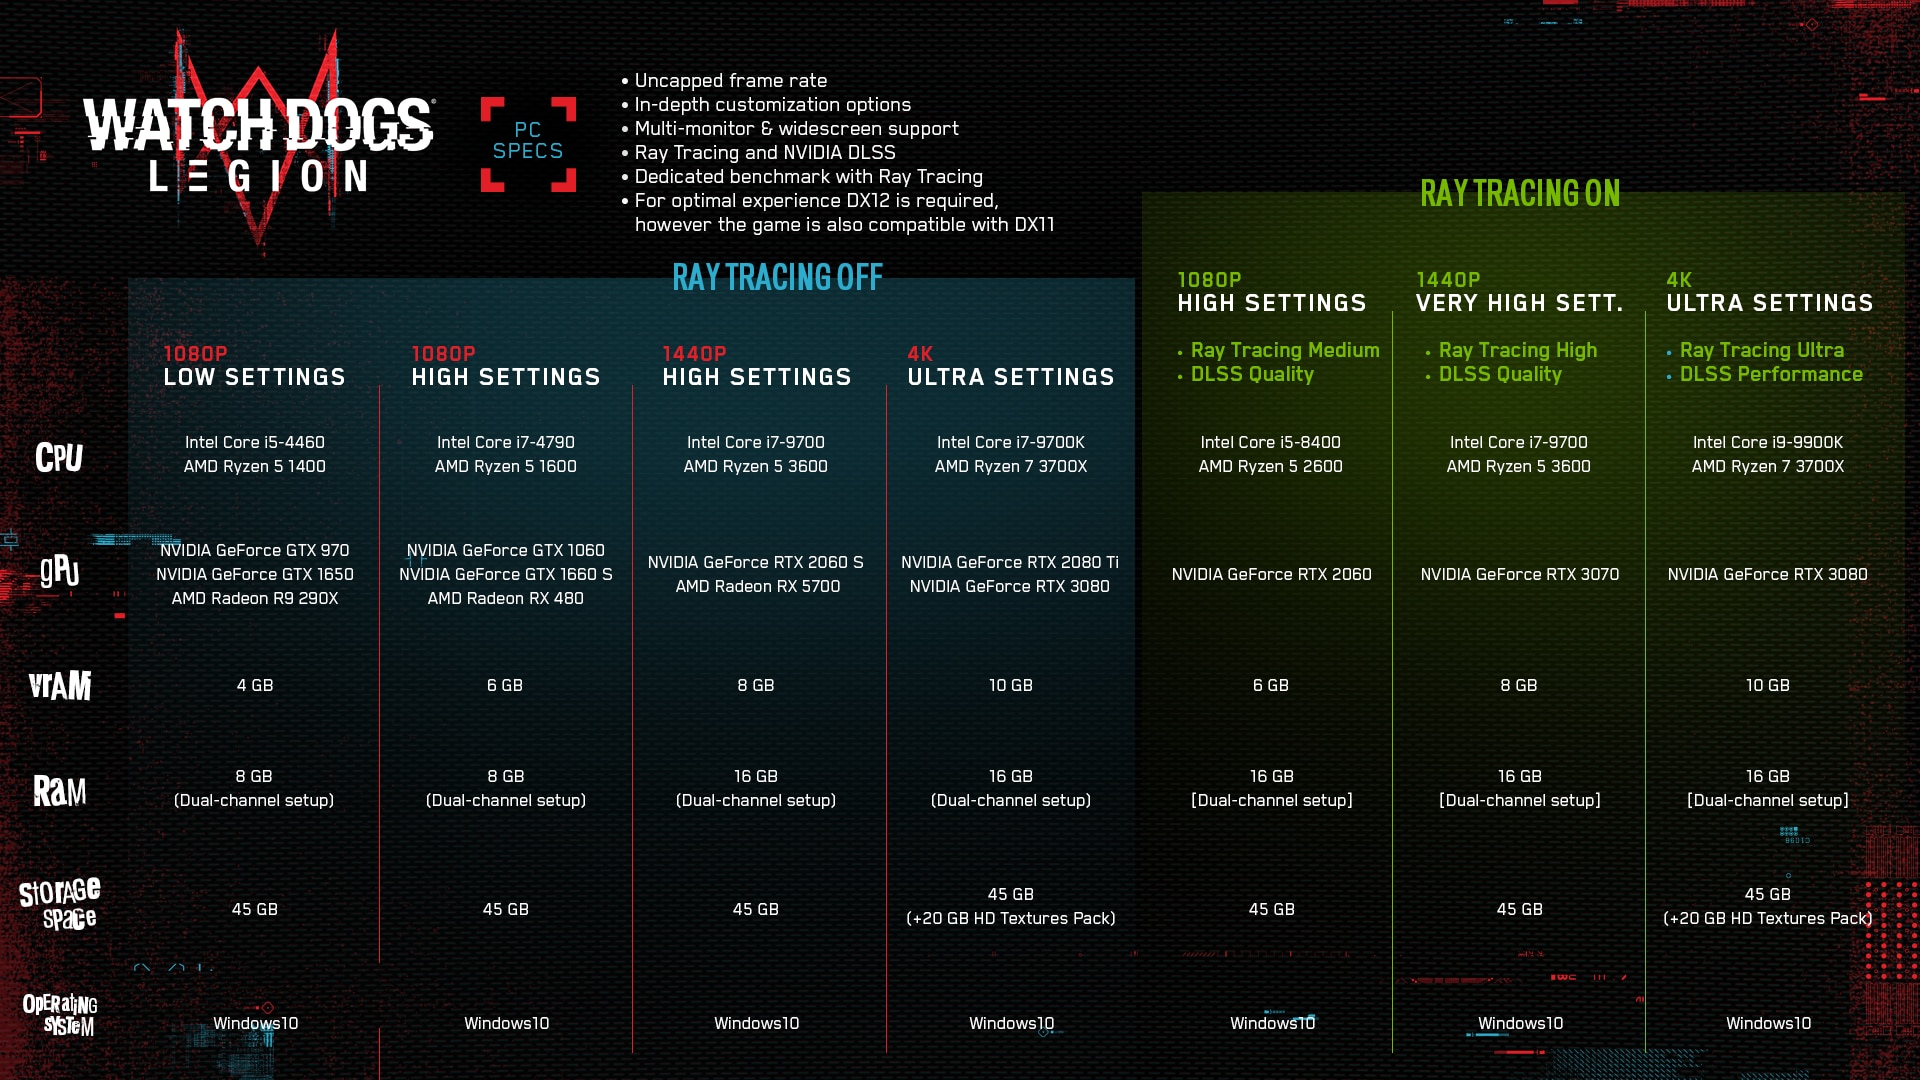 [UN] [News] Watch Dogs: Legion PC Specs Revealed - UPDATED INFO GRAPHIC